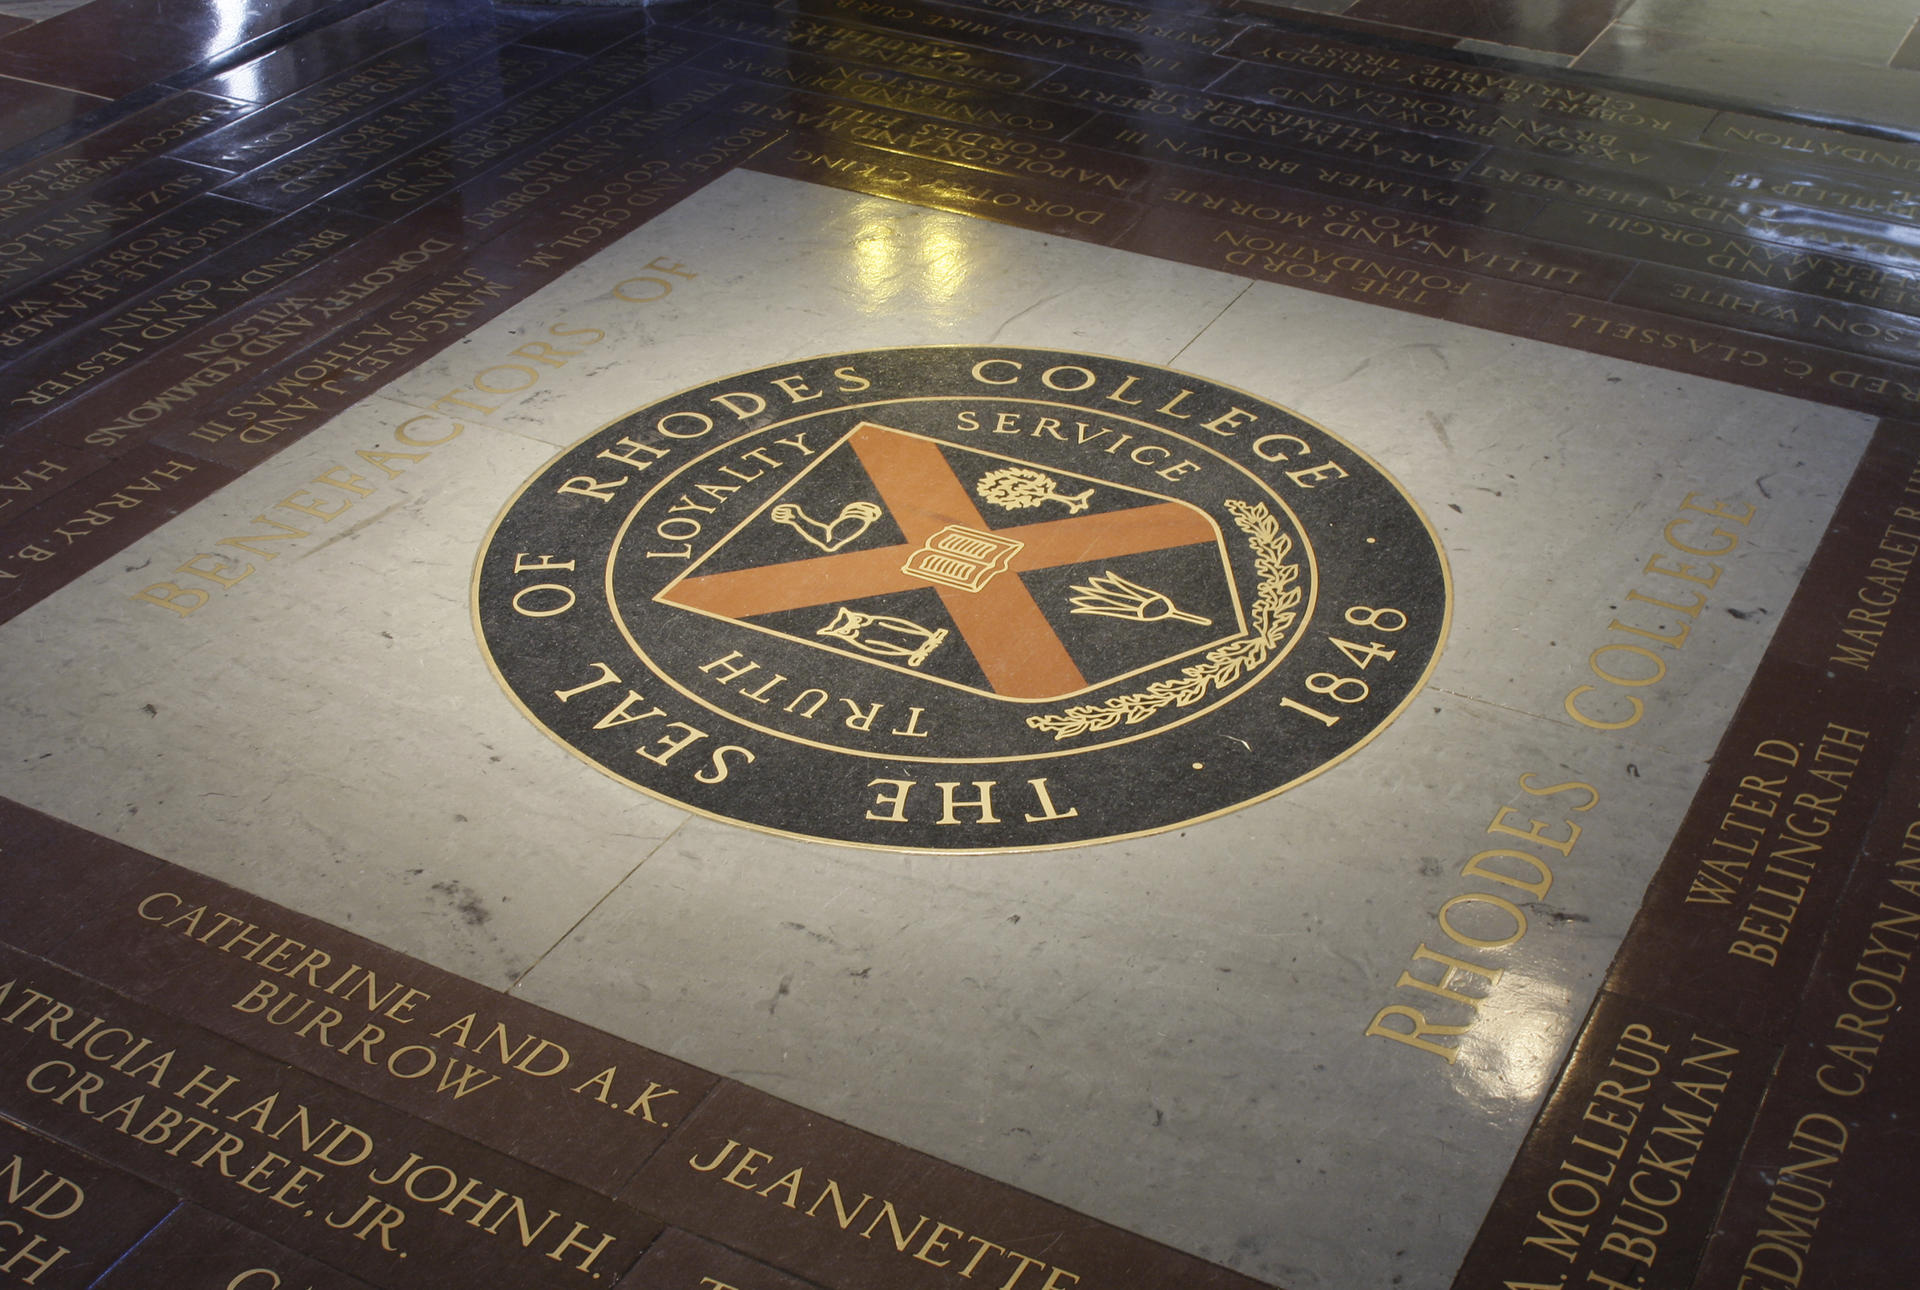 The seal of Rhodes College inlaid in the floor of Palmer Hall. If a student walk across it, the legend says that they will ever graduate